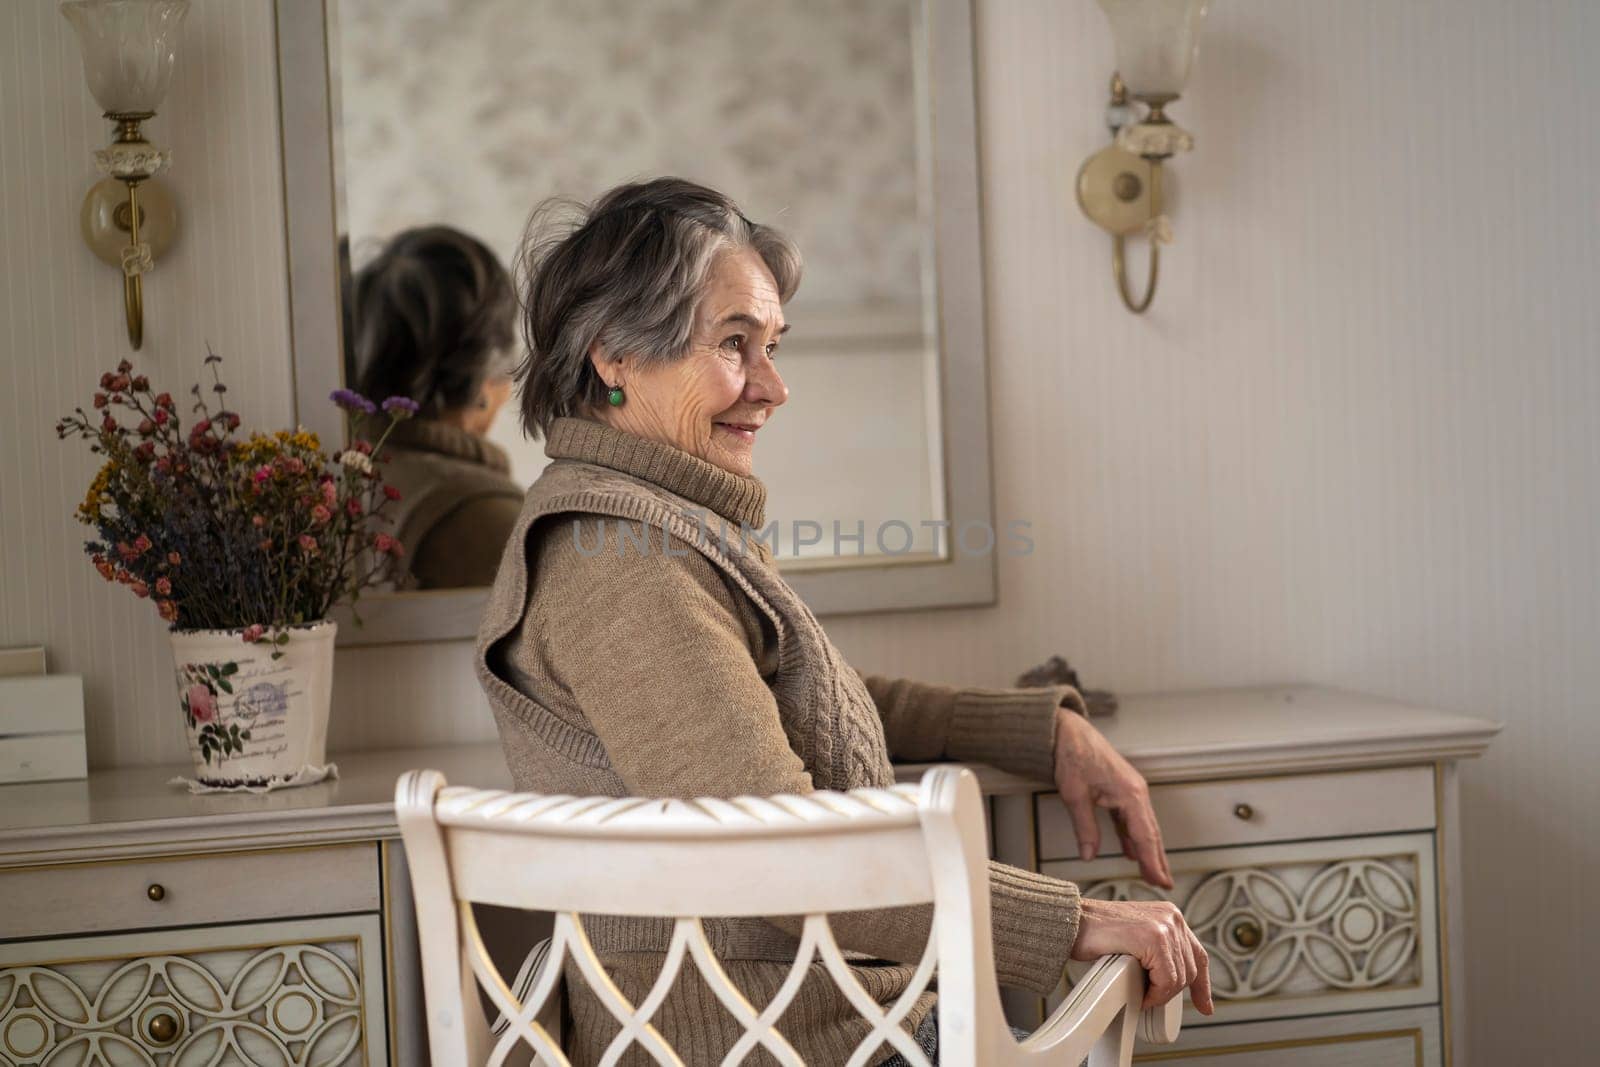 An elderly smiling woman of 80+ years of age spends a good time at home, a grandmother takes care of her appearance, looks in the mirror, sits at a dressing table in her bedroom.